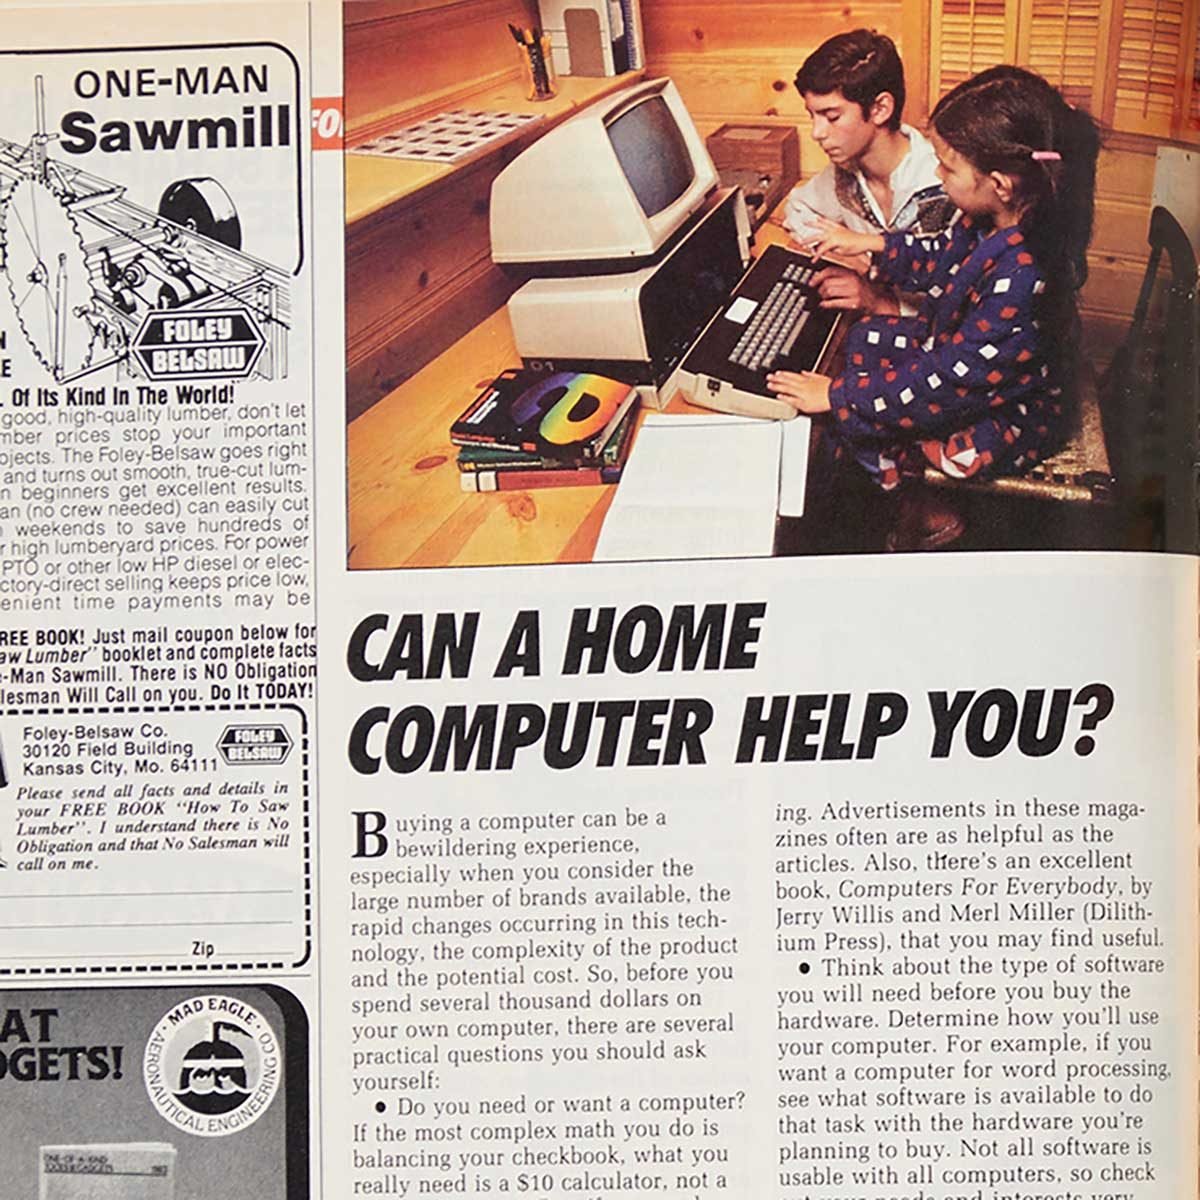 1983 Family Handyman Feature: Can a Computer Help You?